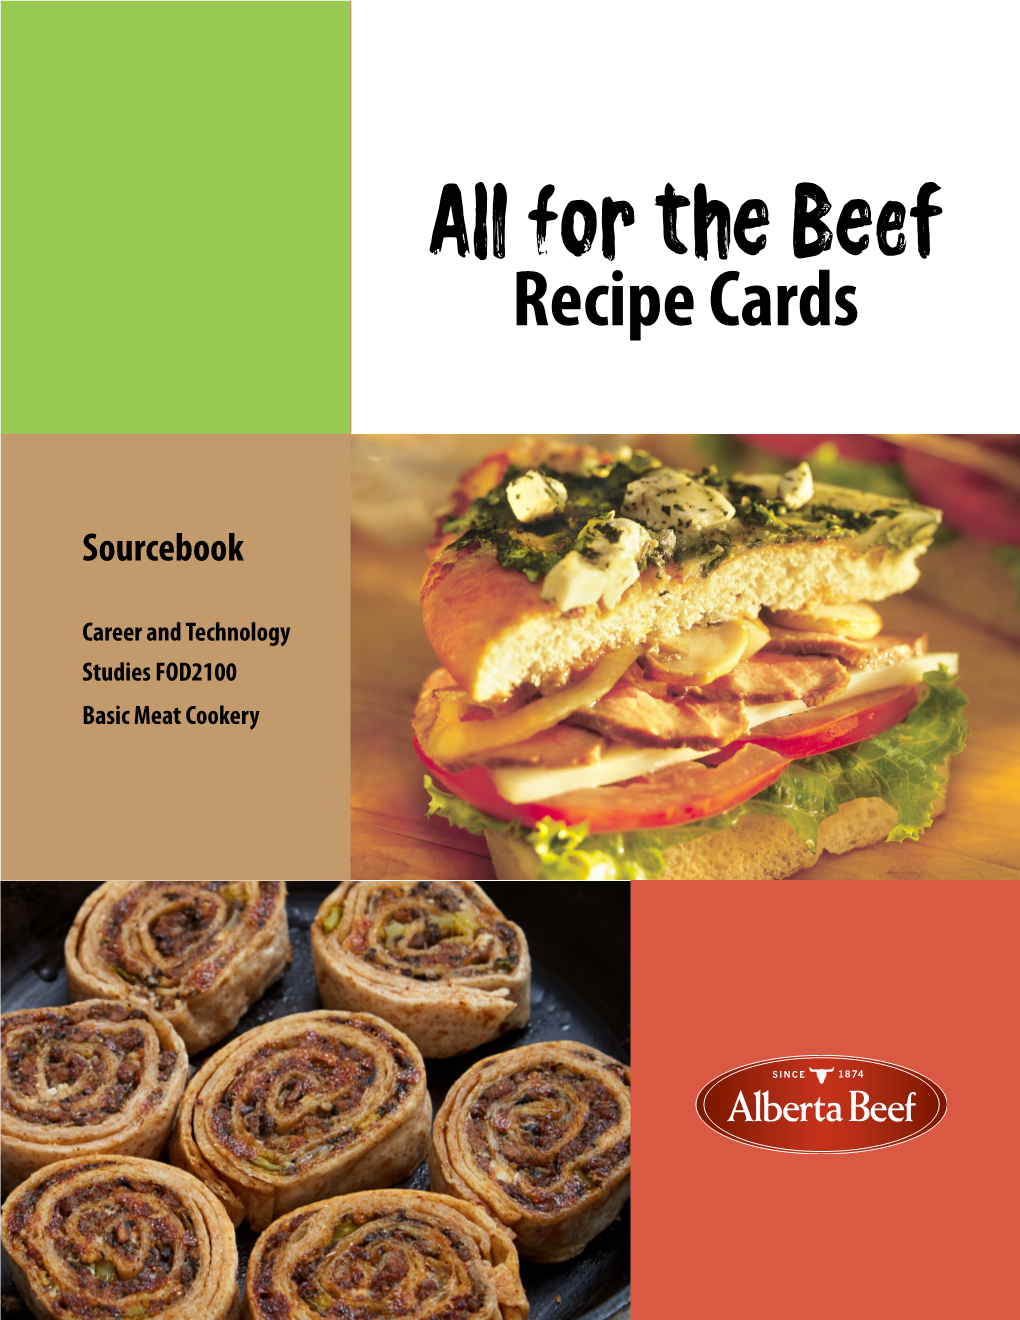 All for the Beef Recipe Cards